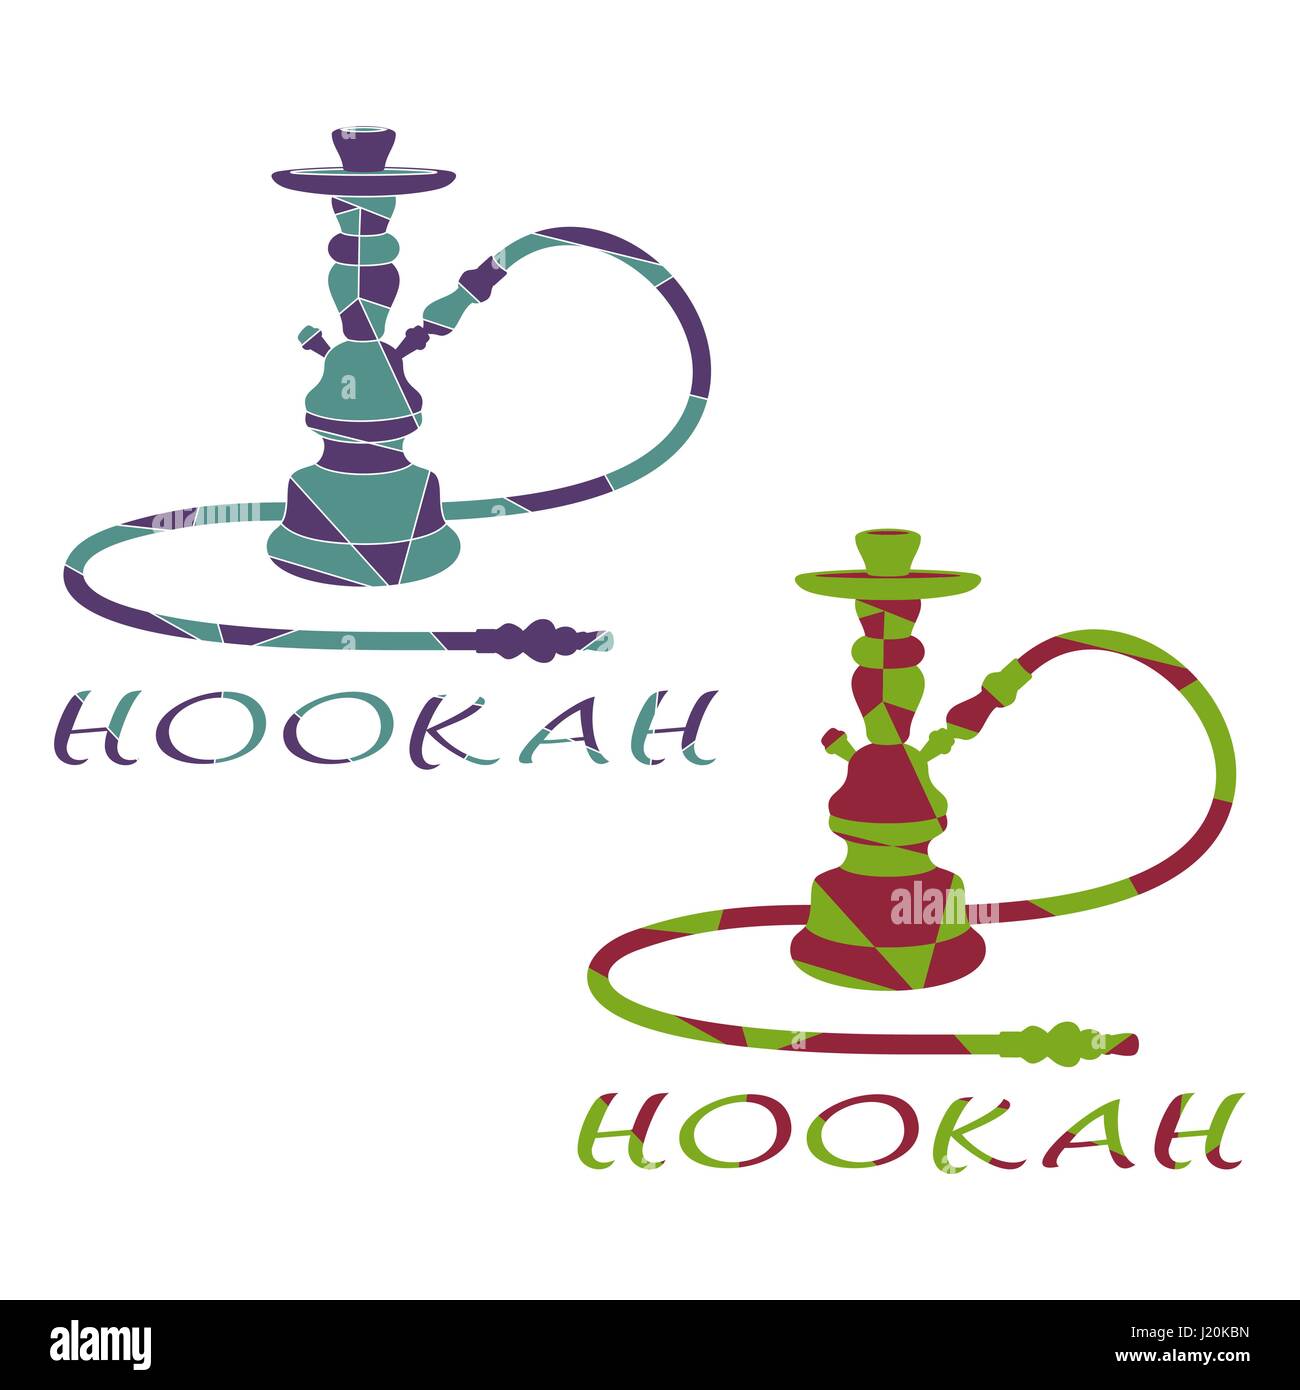 Sheesha cafe Cut Out Stock Images & Pictures - Alamy